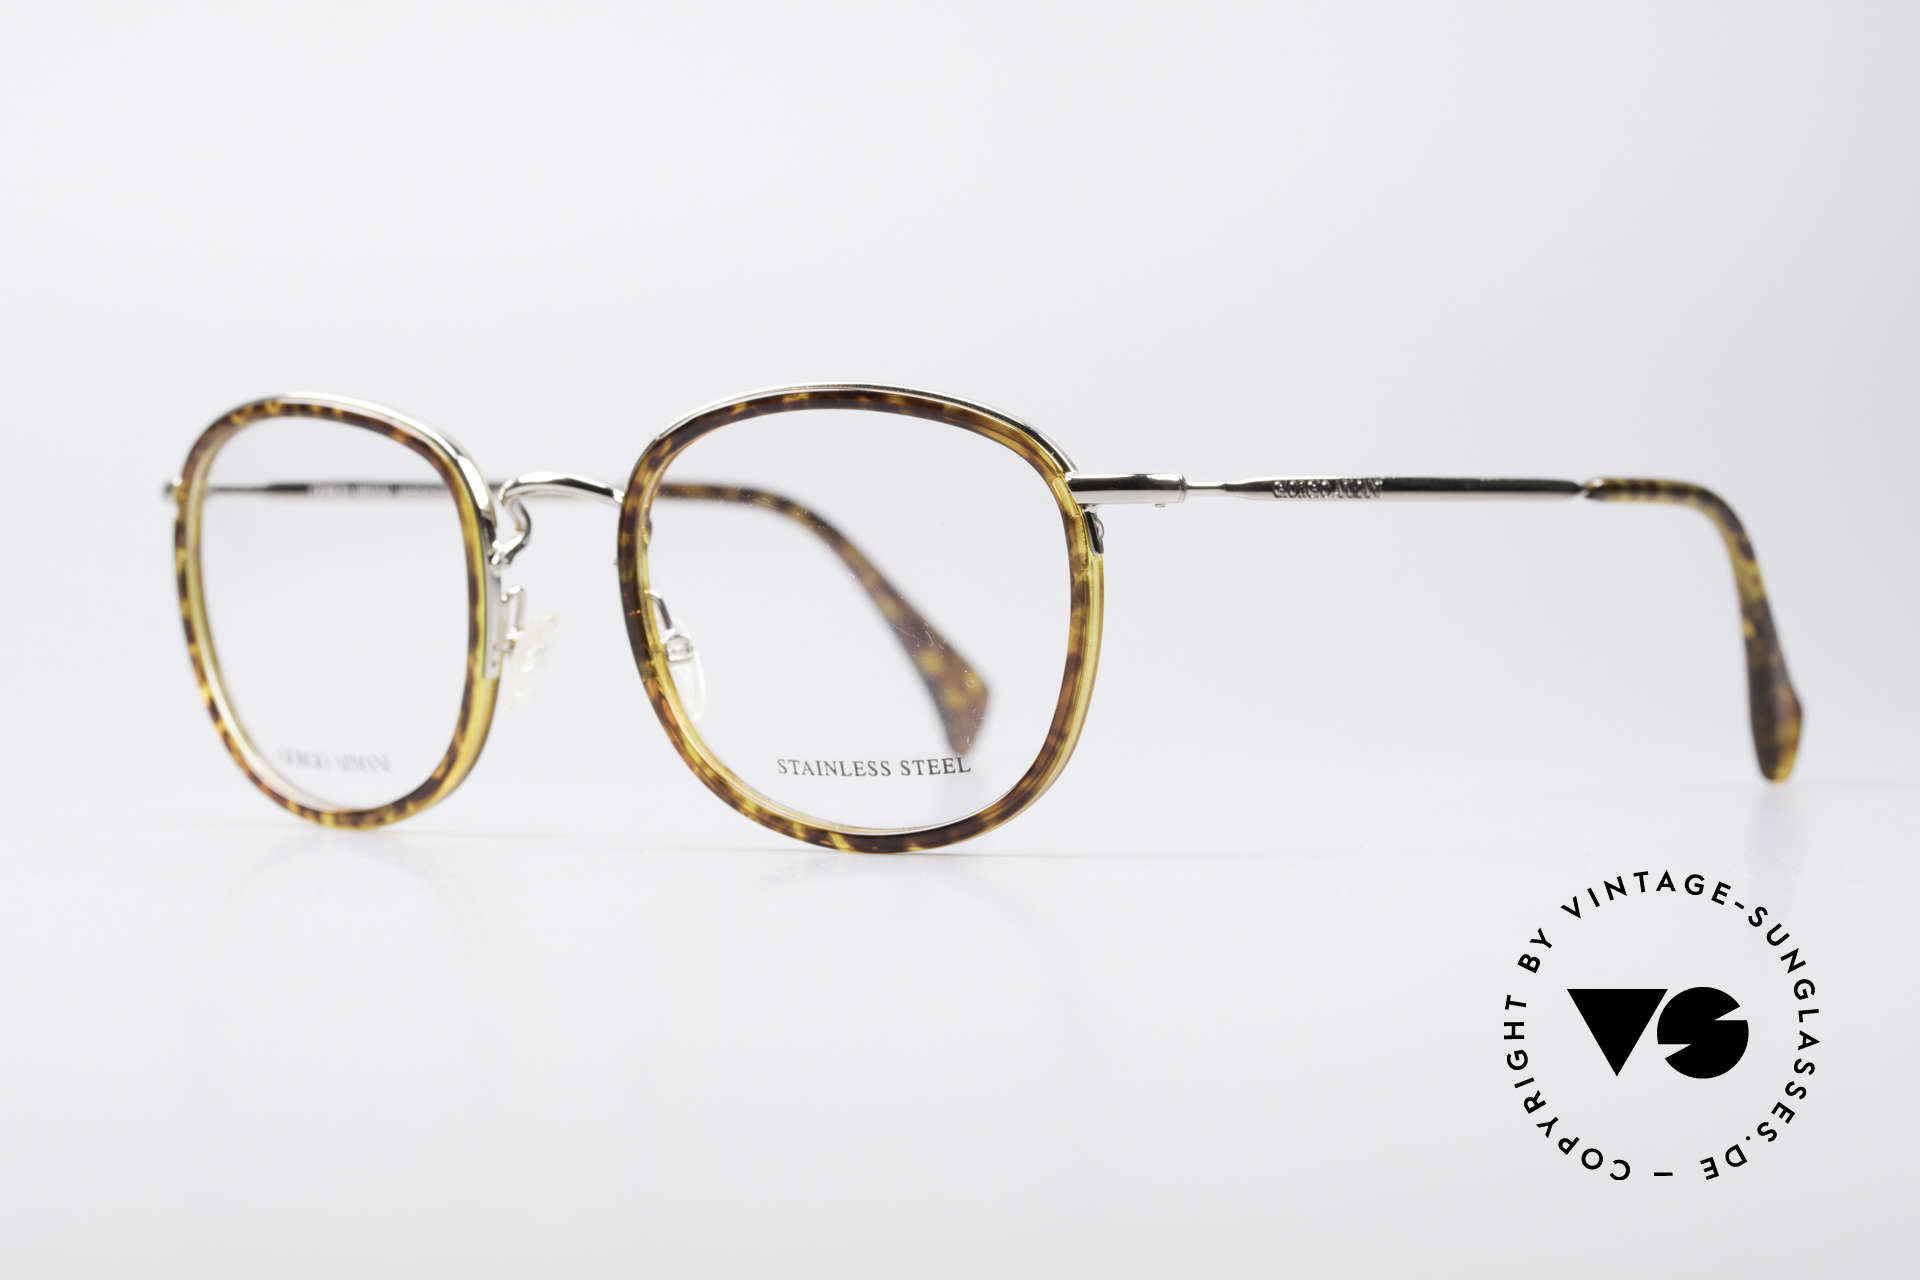 Giorgio Armani 863 Square Panto Eyeglass-Frame, a combination of amber and silver (stainless steel), Made for Men